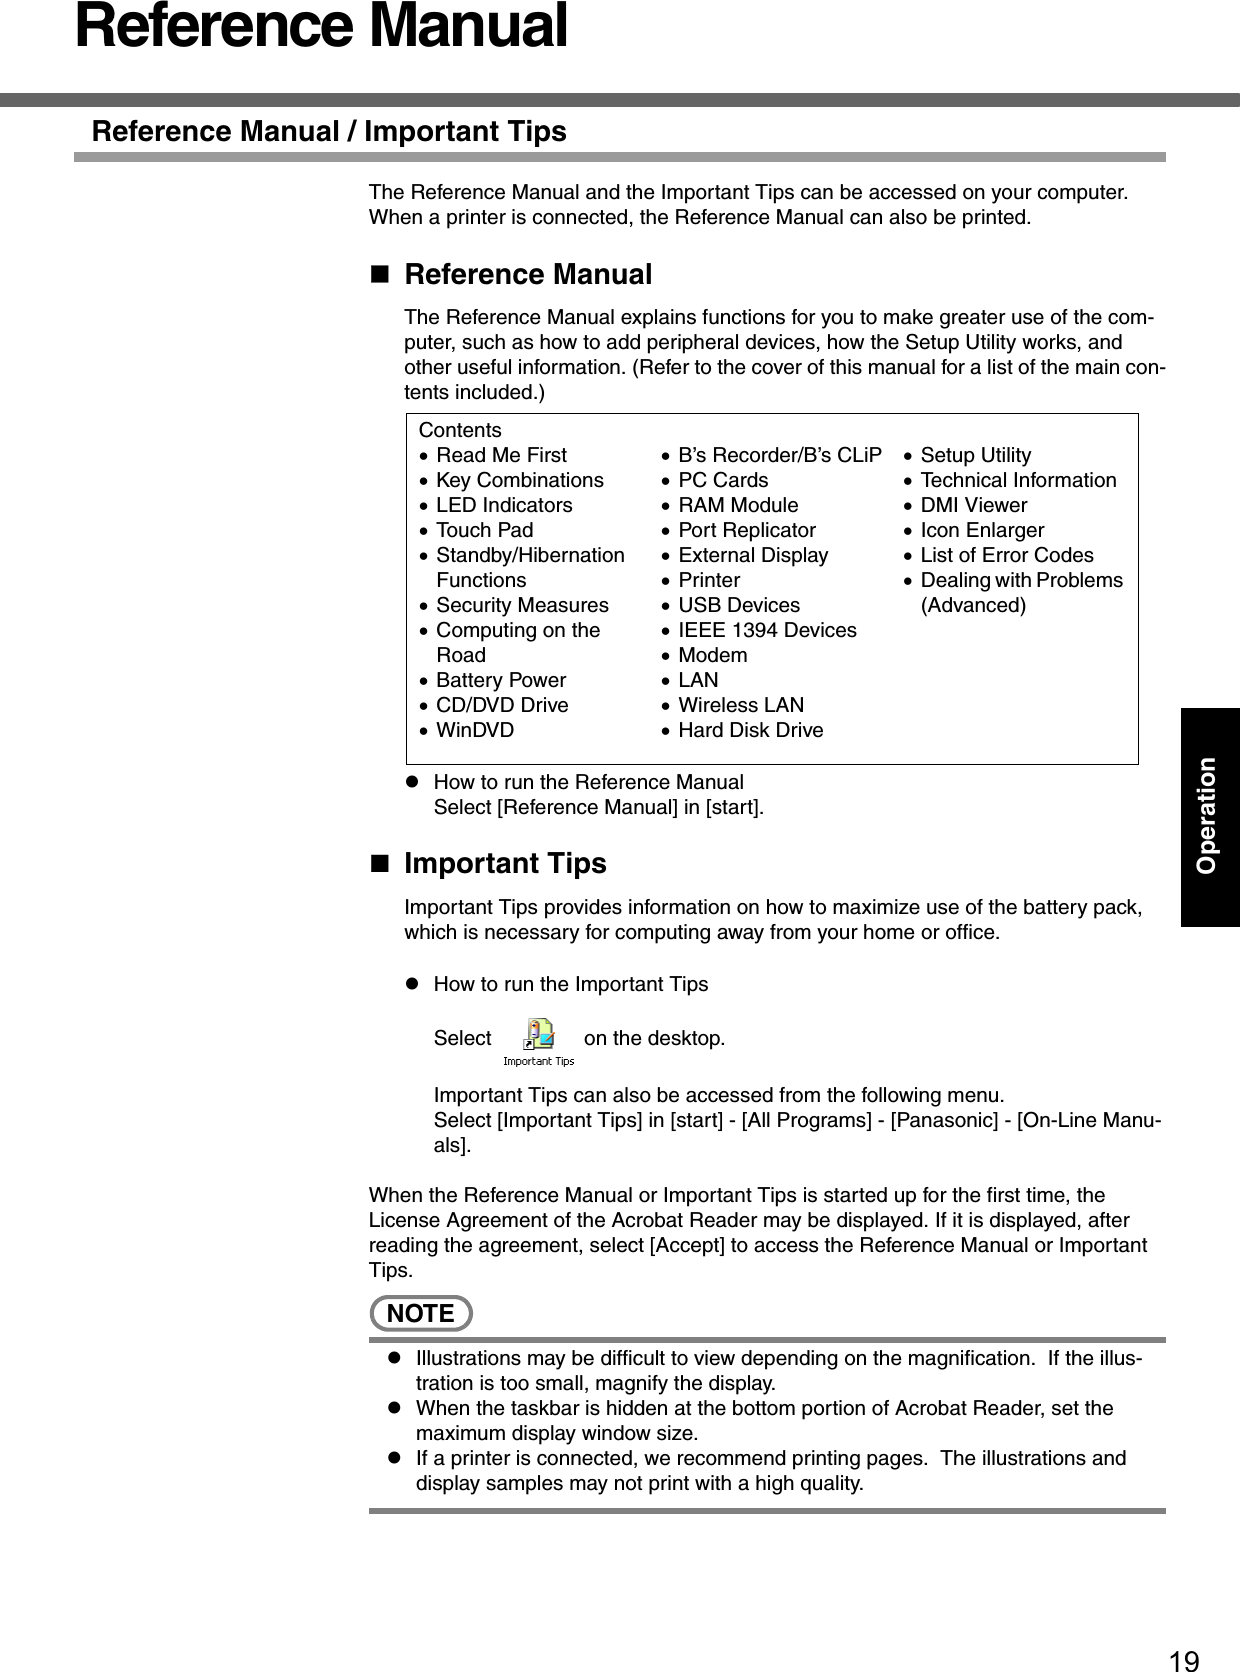 19OperationReference ManualReference Manual / Important TipsThe Reference Manual and the Important Tips can be accessed on your computer.  When a printer is connected, the Reference Manual can also be printed.Reference ManualThe Reference Manual explains functions for you to make greater use of the com-puter, such as how to add peripheral devices, how the Setup Utility works, and other useful information. (Refer to the cover of this manual for a list of the main con-tents included.)zHow to run the Reference ManualSelect [Reference Manual] in [start].Important TipsImportant Tips provides information on how to maximize use of the battery pack, which is necessary for computing away from your home or office.zHow to run the Important TipsSelect   on the desktop.Important Tips can also be accessed from the following menu.Select [Important Tips] in [start] - [All Programs] - [Panasonic] - [On-Line Manu-als].When the Reference Manual or Important Tips is started up for the first time, the License Agreement of the Acrobat Reader may be displayed. If it is displayed, after reading the agreement, select [Accept] to access the Reference Manual or Important Tips.NOTEzIllustrations may be difficult to view depending on the magnification.  If the illus-tration is too small, magnify the display.zWhen the taskbar is hidden at the bottom portion of Acrobat Reader, set the maximum display window size.zIf a printer is connected, we recommend printing pages.  The illustrations and display samples may not print with a high quality.Contents•Read Me First •Key Combinations•LED Indicators•Touch Pad•Standby/Hibernation Functions•Security Measures•Computing on the Road•Battery Power•CD/DVD Drive•WinDVD•B’s Recorder/B’s CLiP•PC Cards•RAM Module•Port Replicator•External Display•Printer•USB Devices•IEEE 1394 Devices•Modem•LAN•Wireless LAN•Hard Disk Drive•Setup Utility•Technical Information•DMI Viewer•Icon Enlarger•List of Error Codes•Dealing with Problems (Advanced)